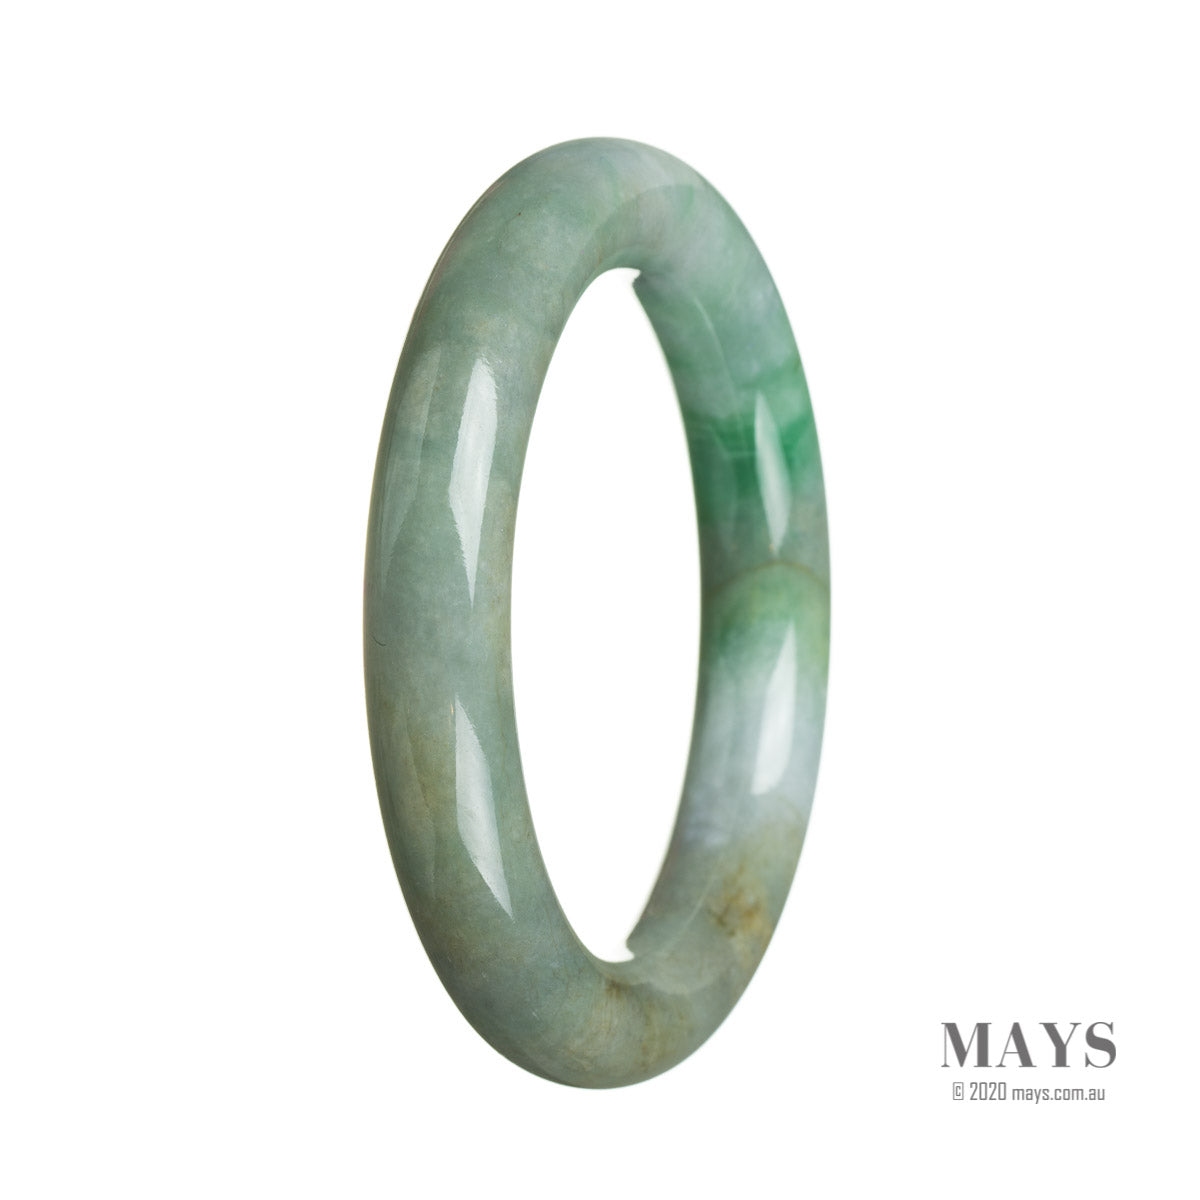 A close-up image of a round jade bangle with grey and green tones. The bangle is made of genuine Grade A Burma jade and has a diameter of 56mm. It features a smooth and polished surface.